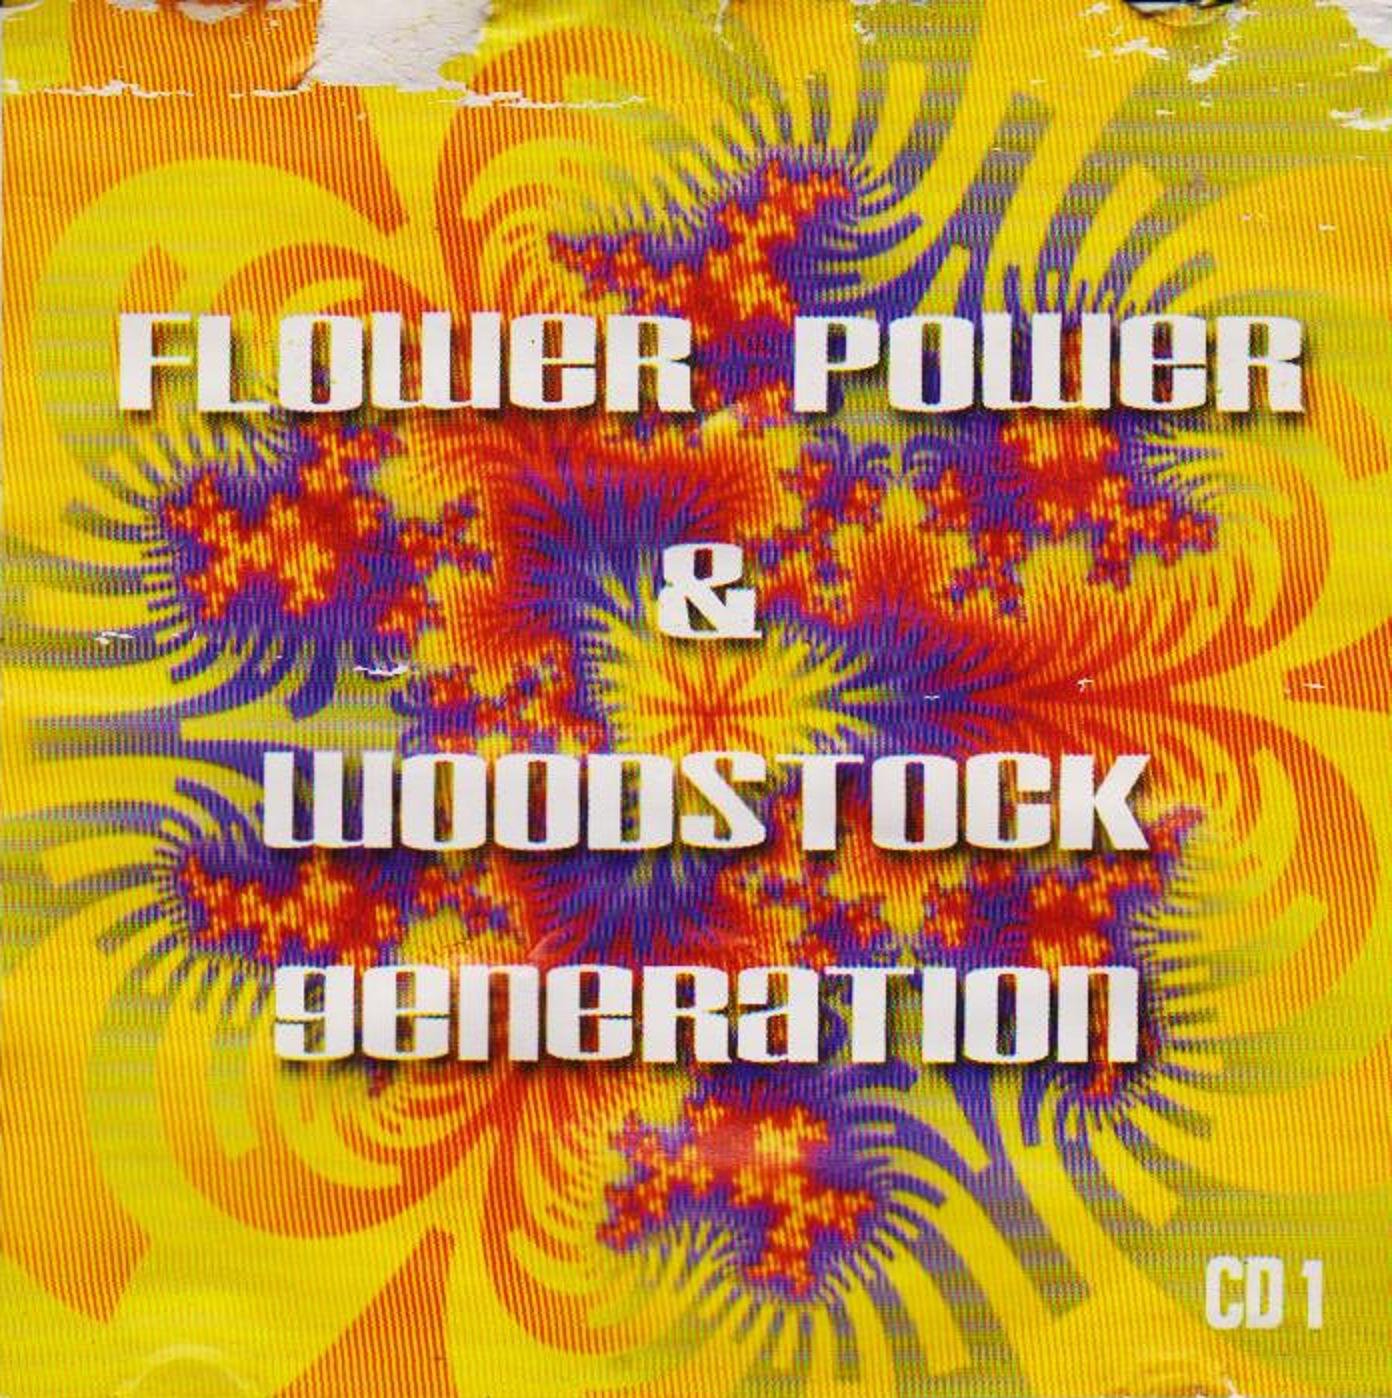 Flower Power and the...